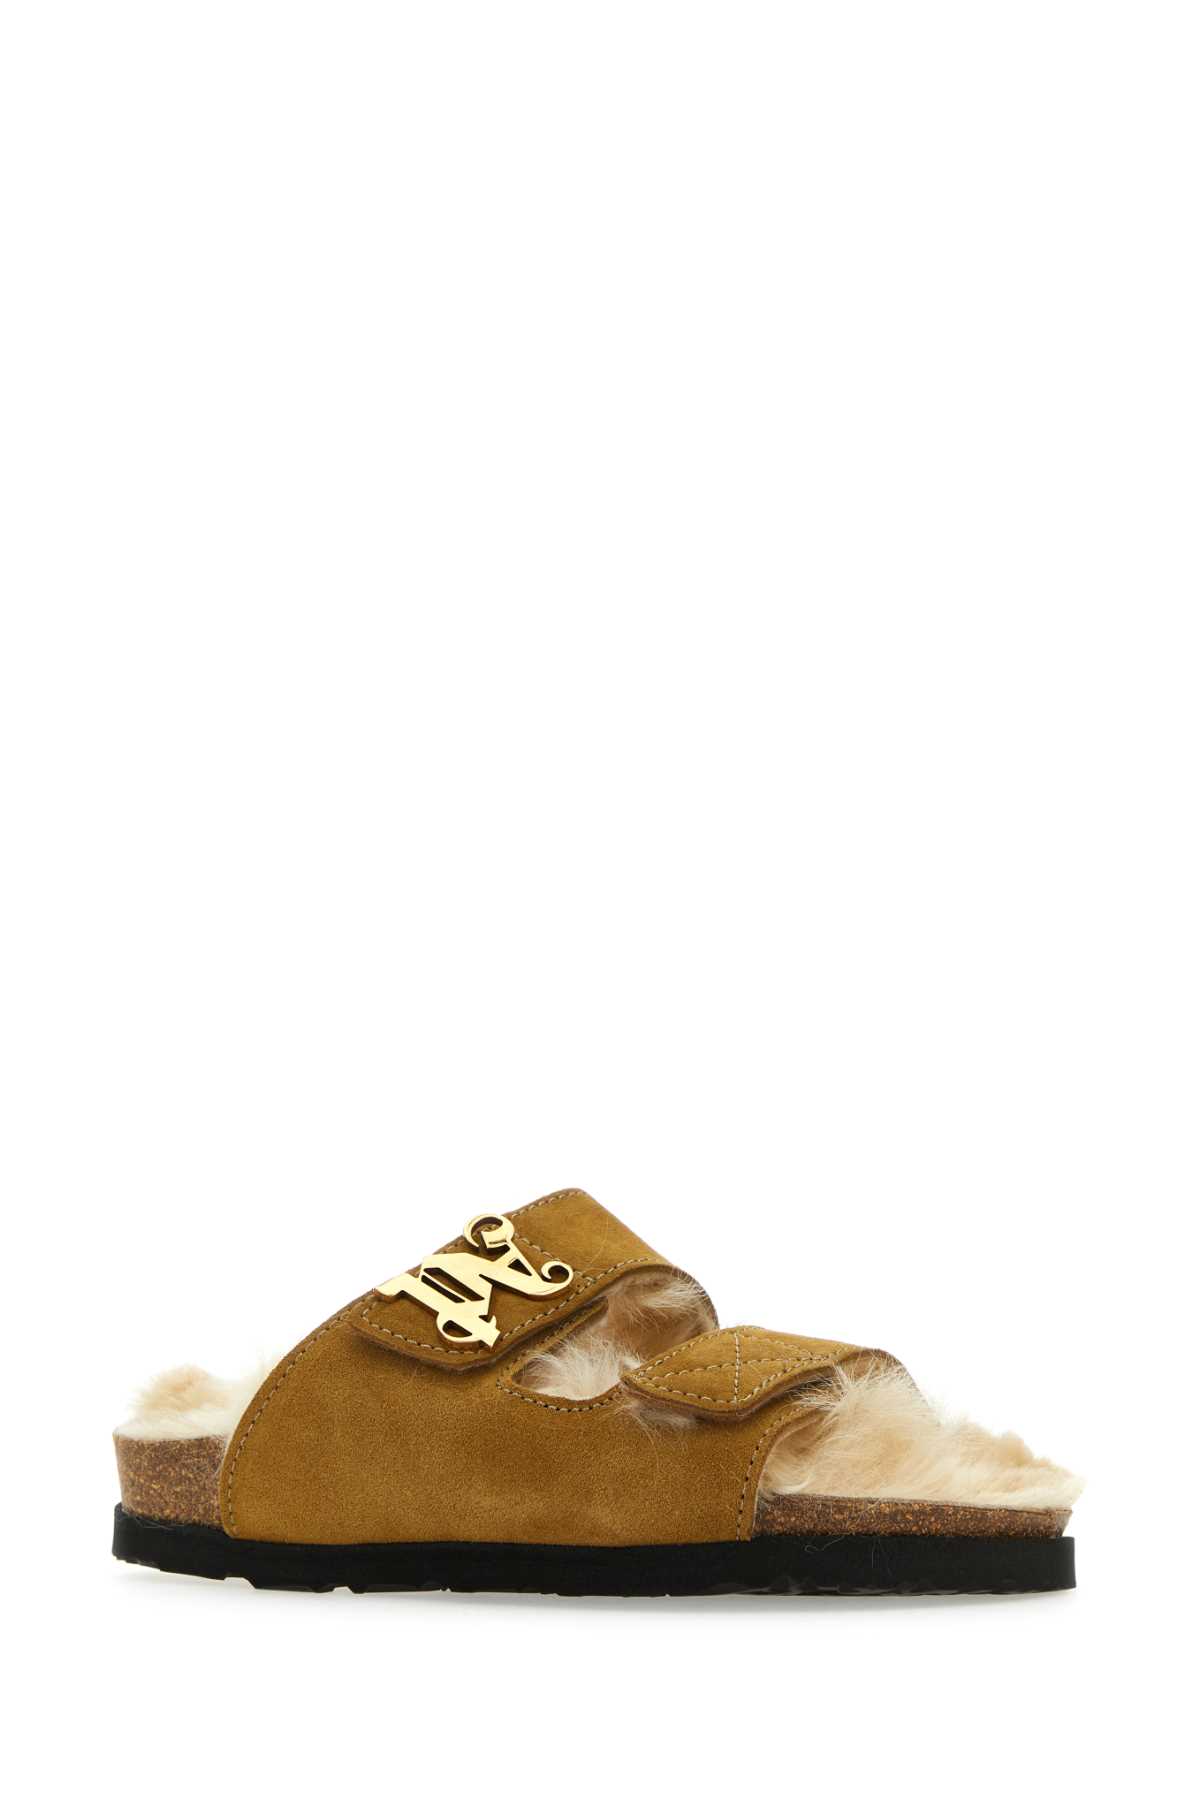 PALM ANGELS CAMEL SUEDE SLIPPERS